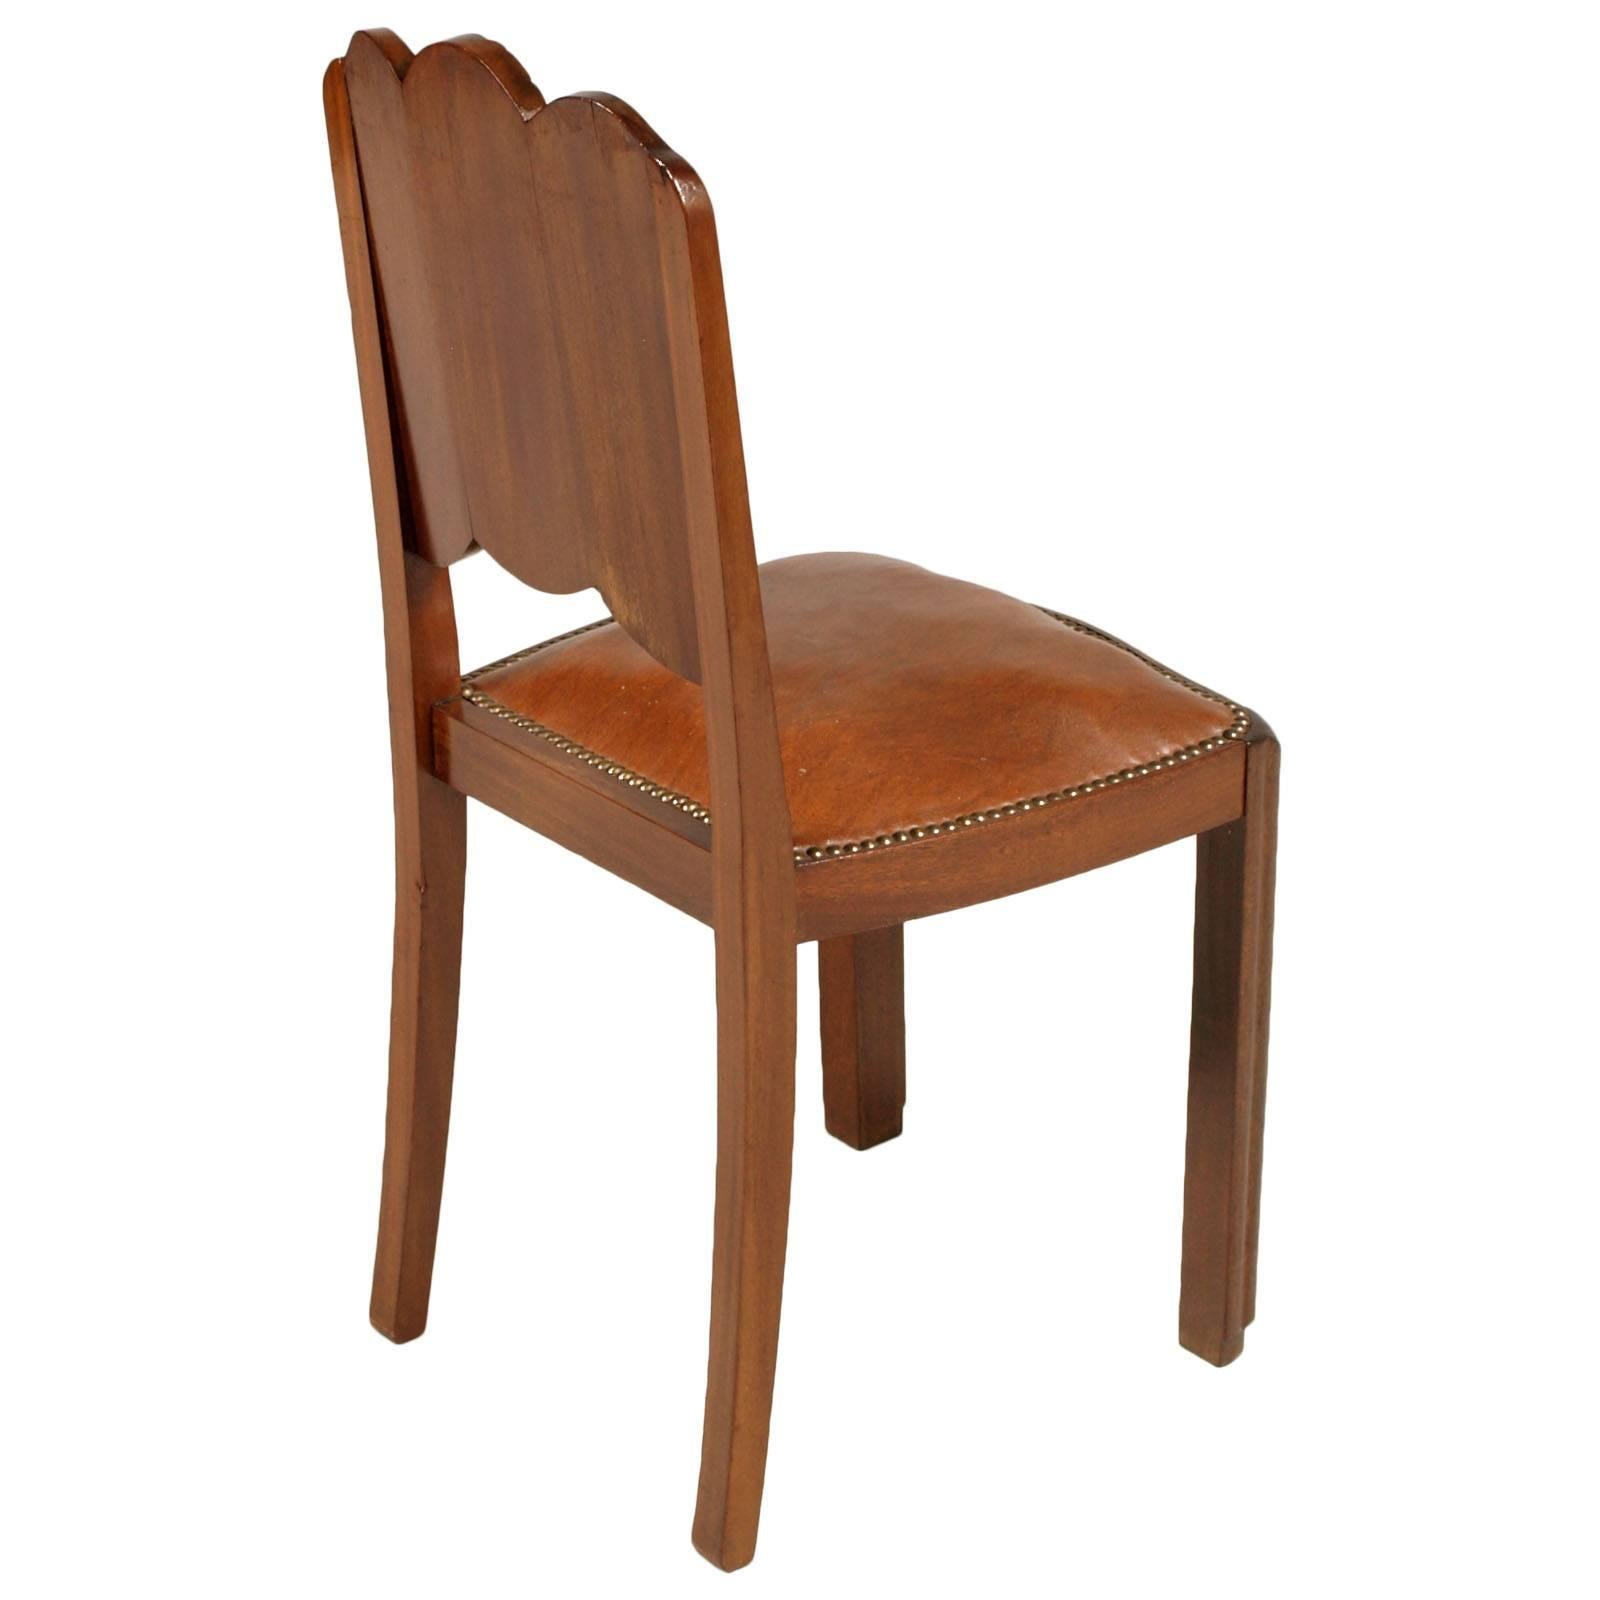 Early 20th Century French Art Nouveau Carved Mahogany Chair, Leatherette Seat In Good Condition For Sale In Vigonza, Padua